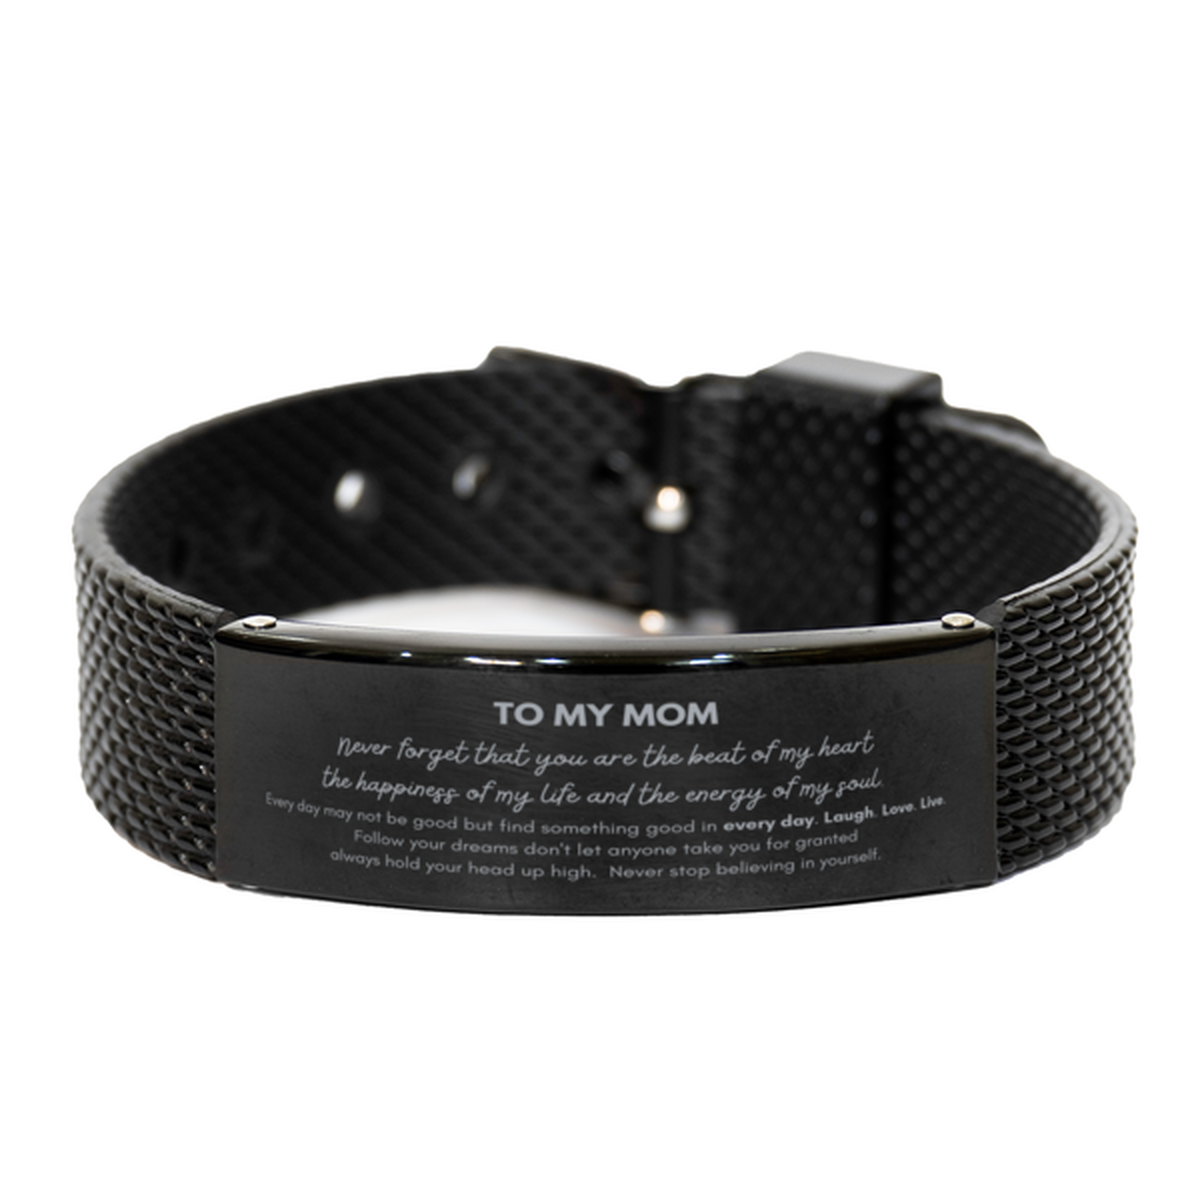 To My Mom Bracelet Gifts, Christmas Mom Black Shark Mesh Bracelet Present, Birthday Unique Motivational For Mom, To My Mom Never forget that you are the beat of my heart the happiness of my life and the energy of my soul